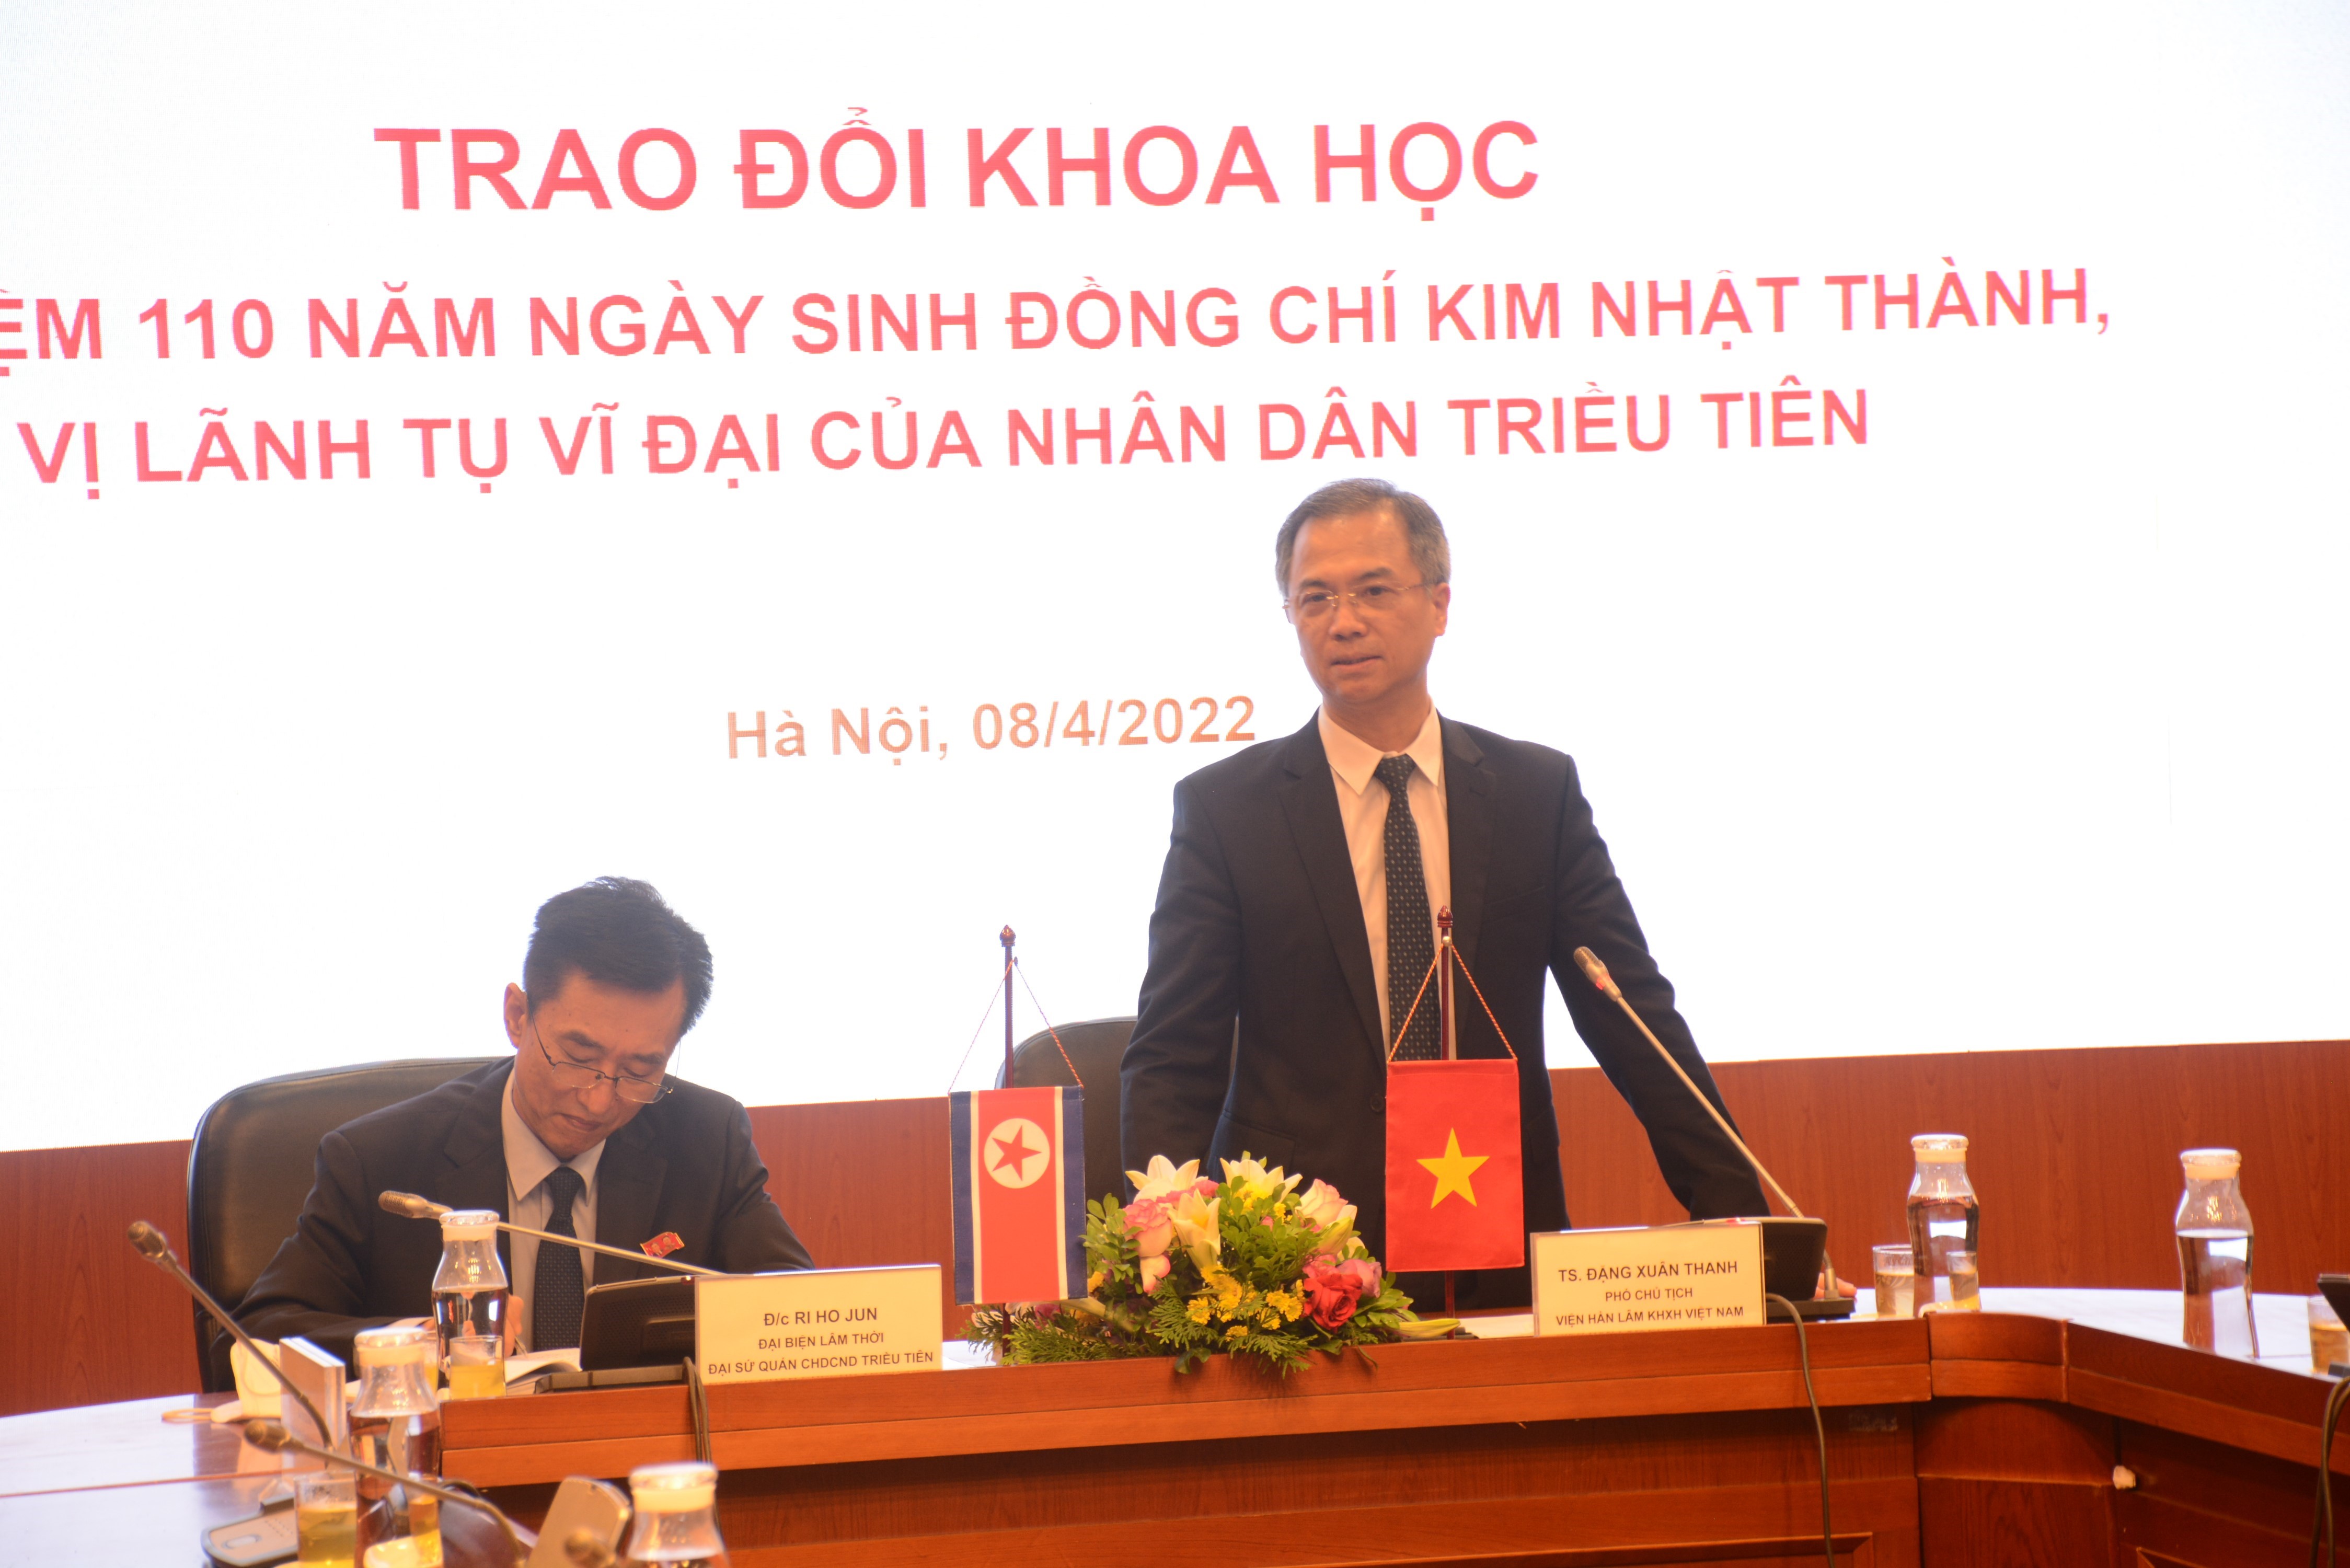 Dr. Dang Xuan Thanh, Vice President of VASS speaking at the opening Seminar